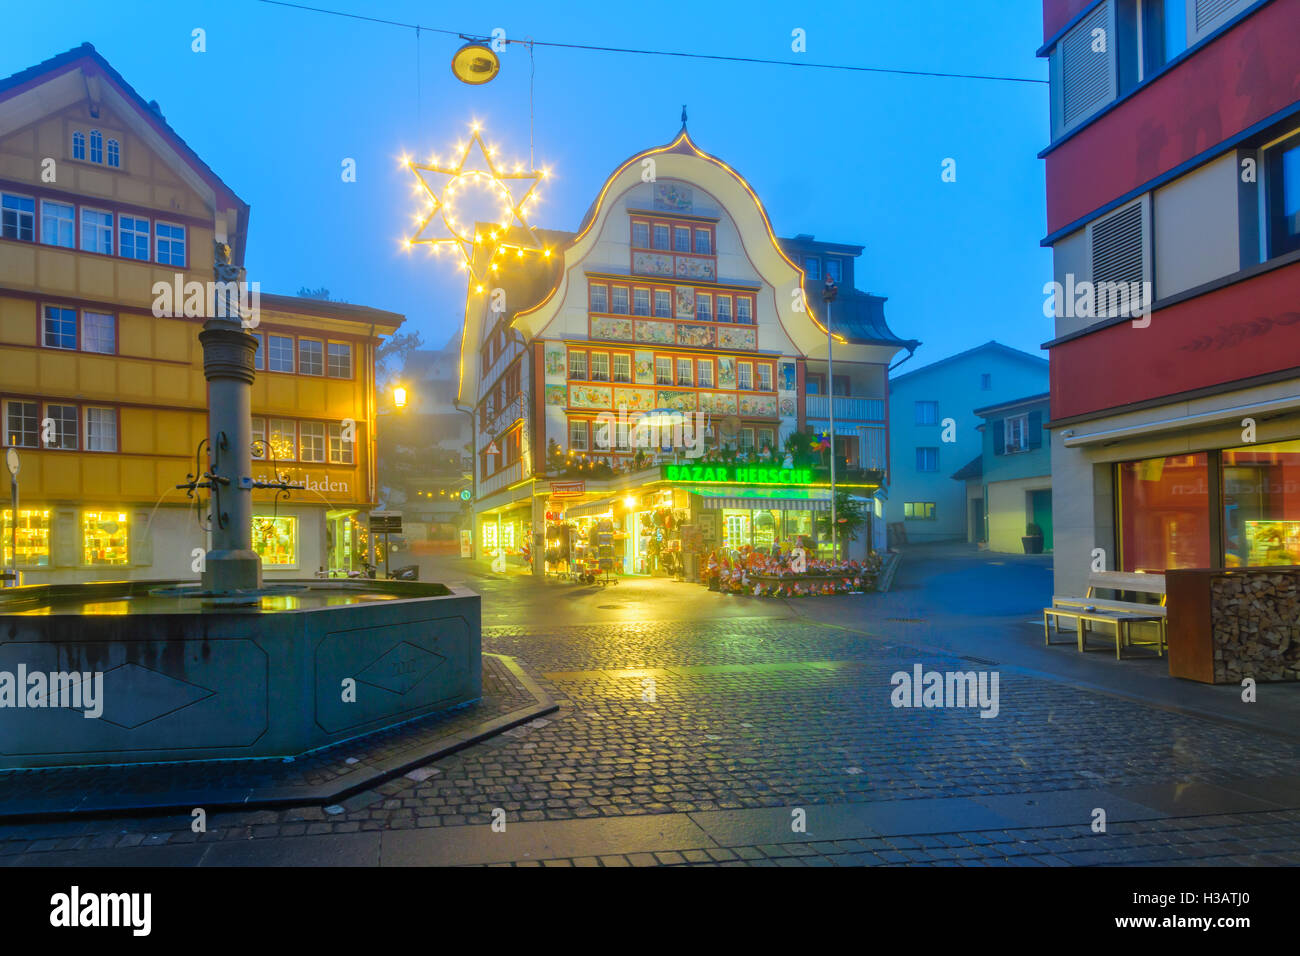 APPENZELL, SWITZERLAND - DECEMBER 30, 2015: Evening scene with painted houses, Christmas decorations, locals and visitors, in Ap Stock Photo